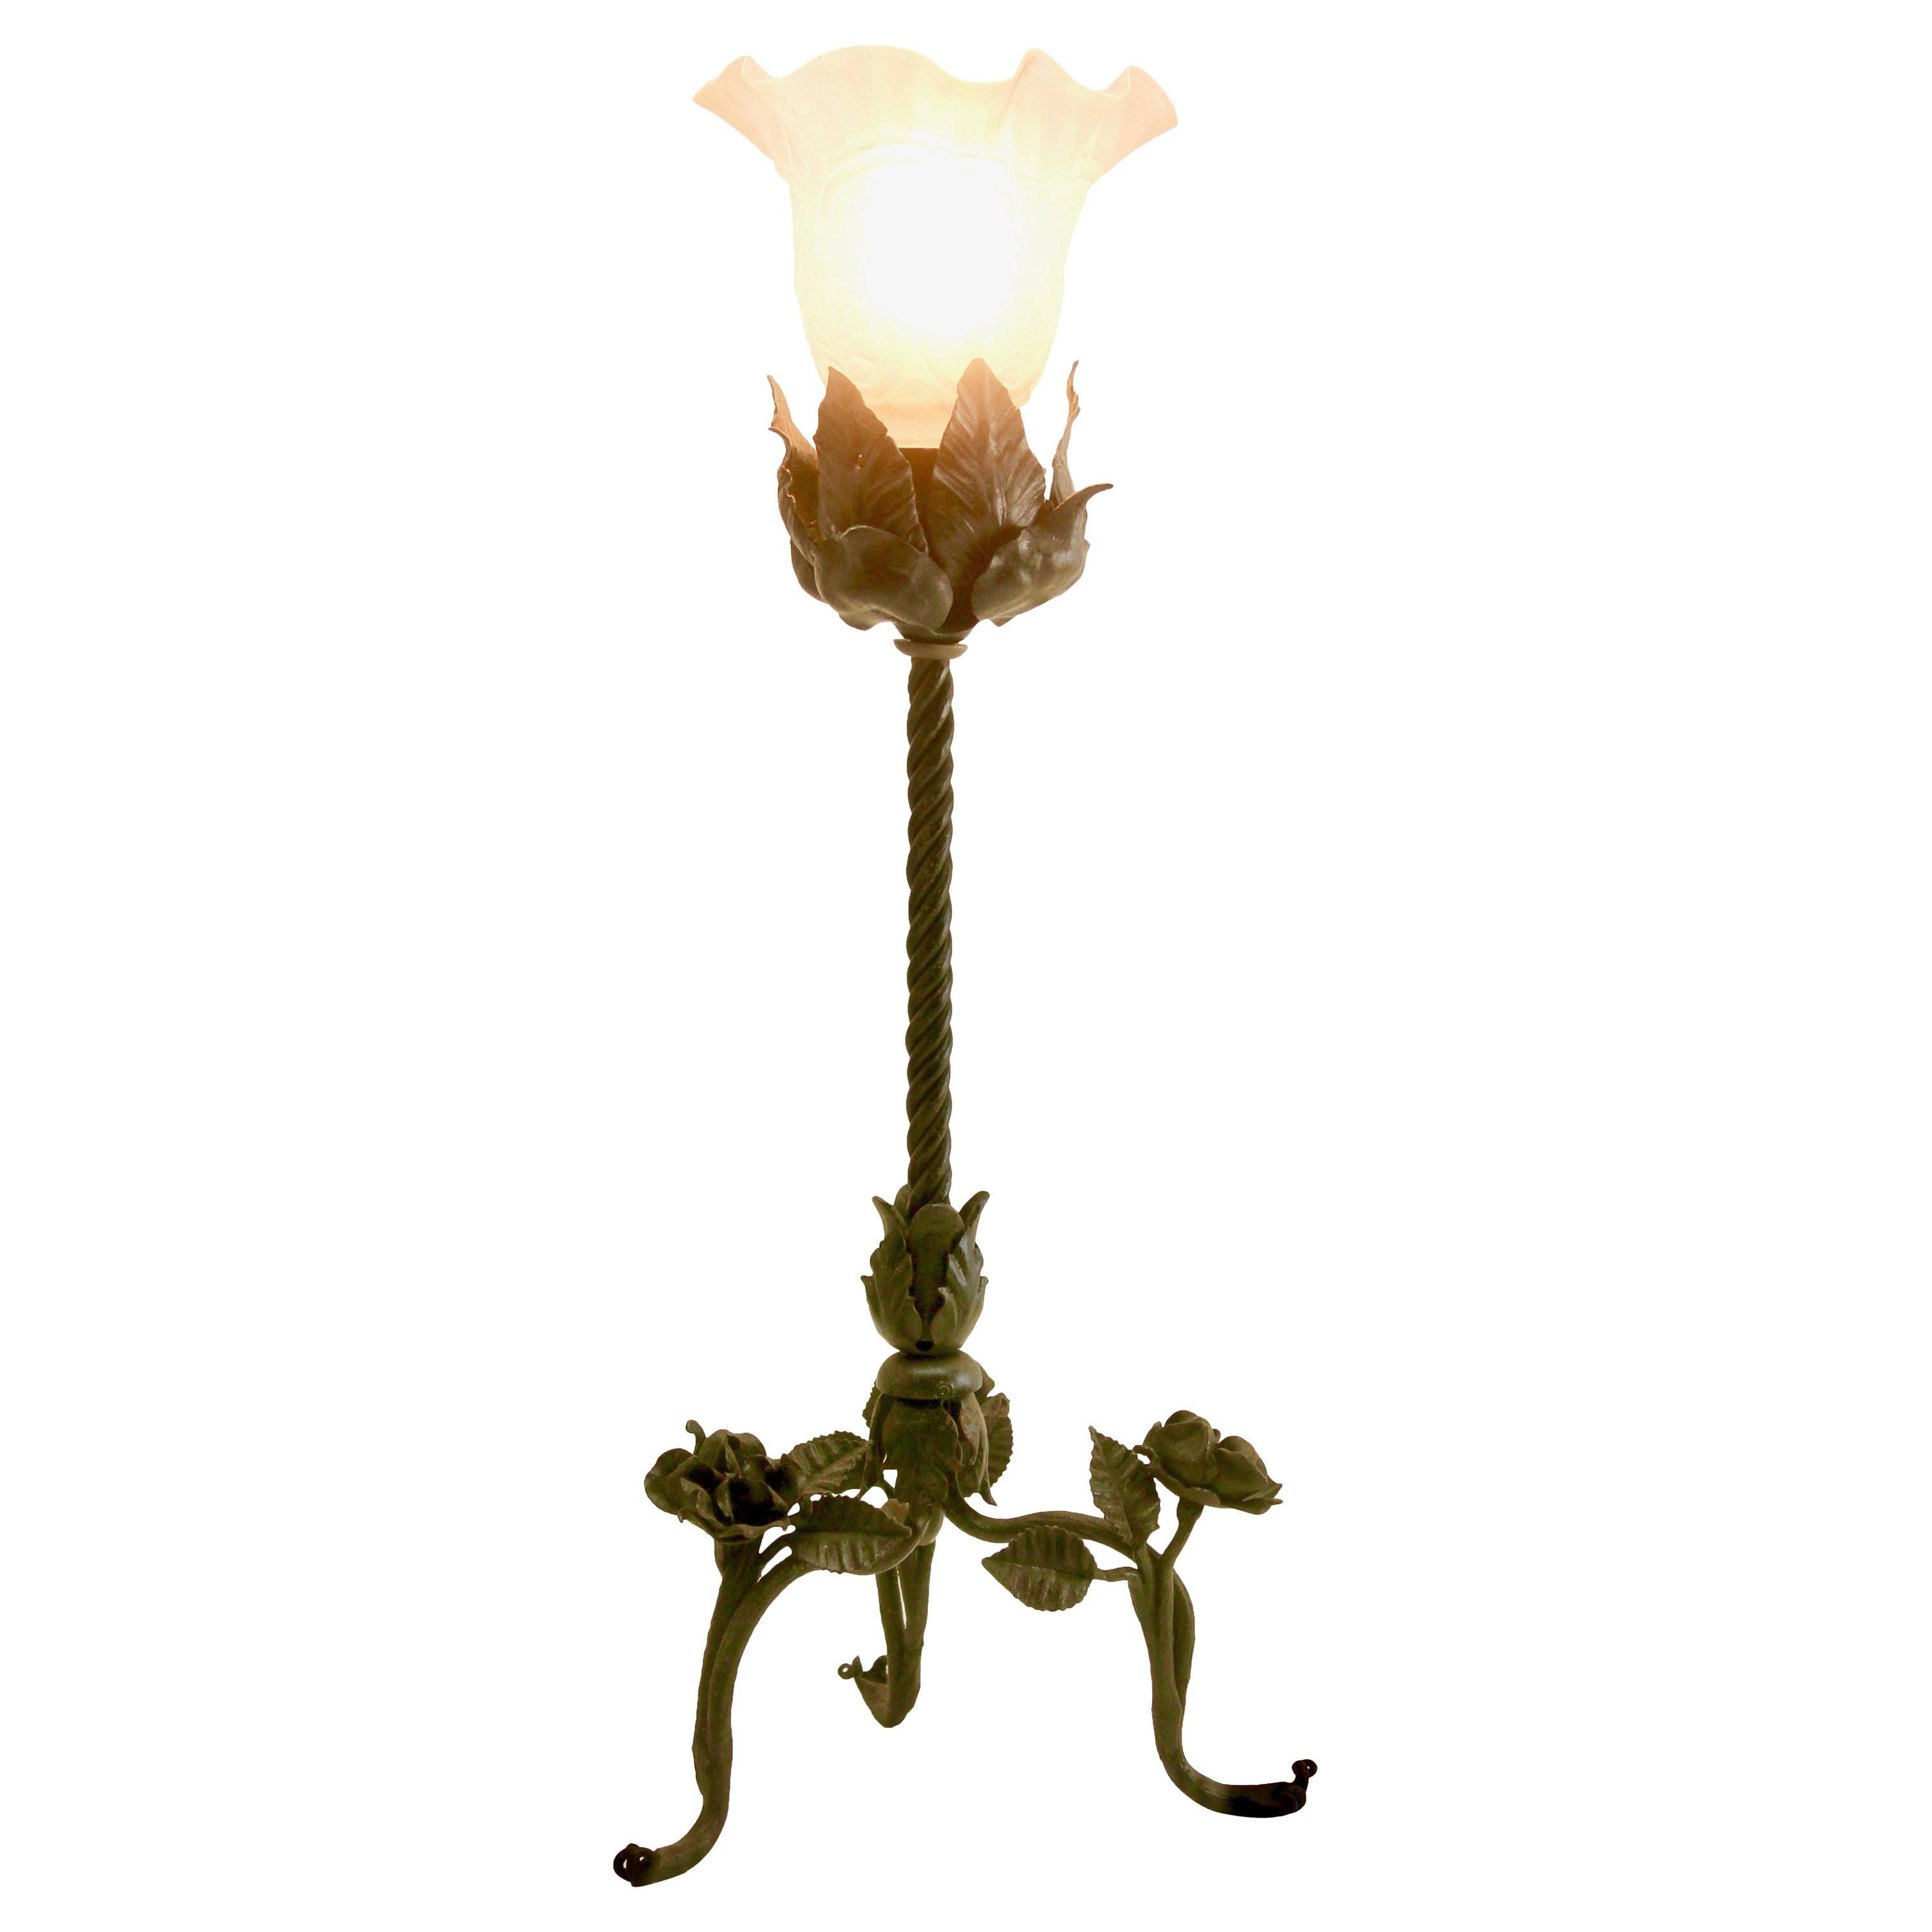 French Art Nouveau Lamp in Wrought Iron with Glass Shade, 1910s